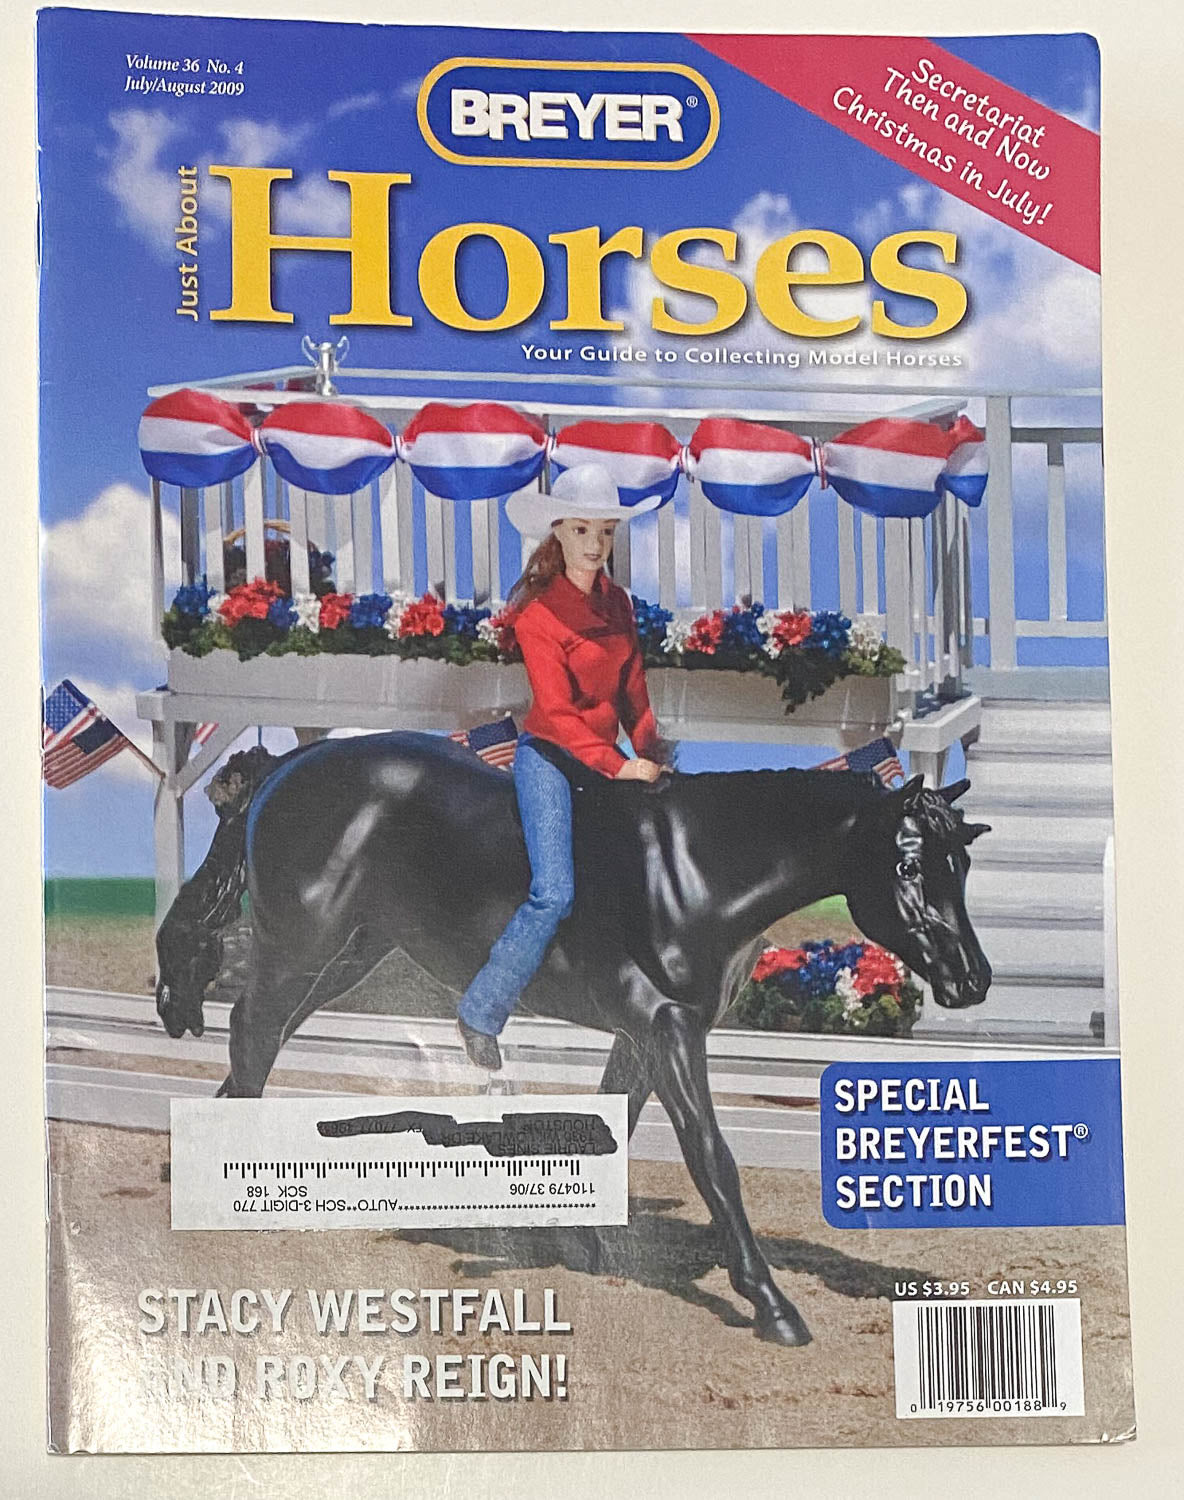 Just About Horses Magazine Vol. 36, No. 4, 2009 July/Aug